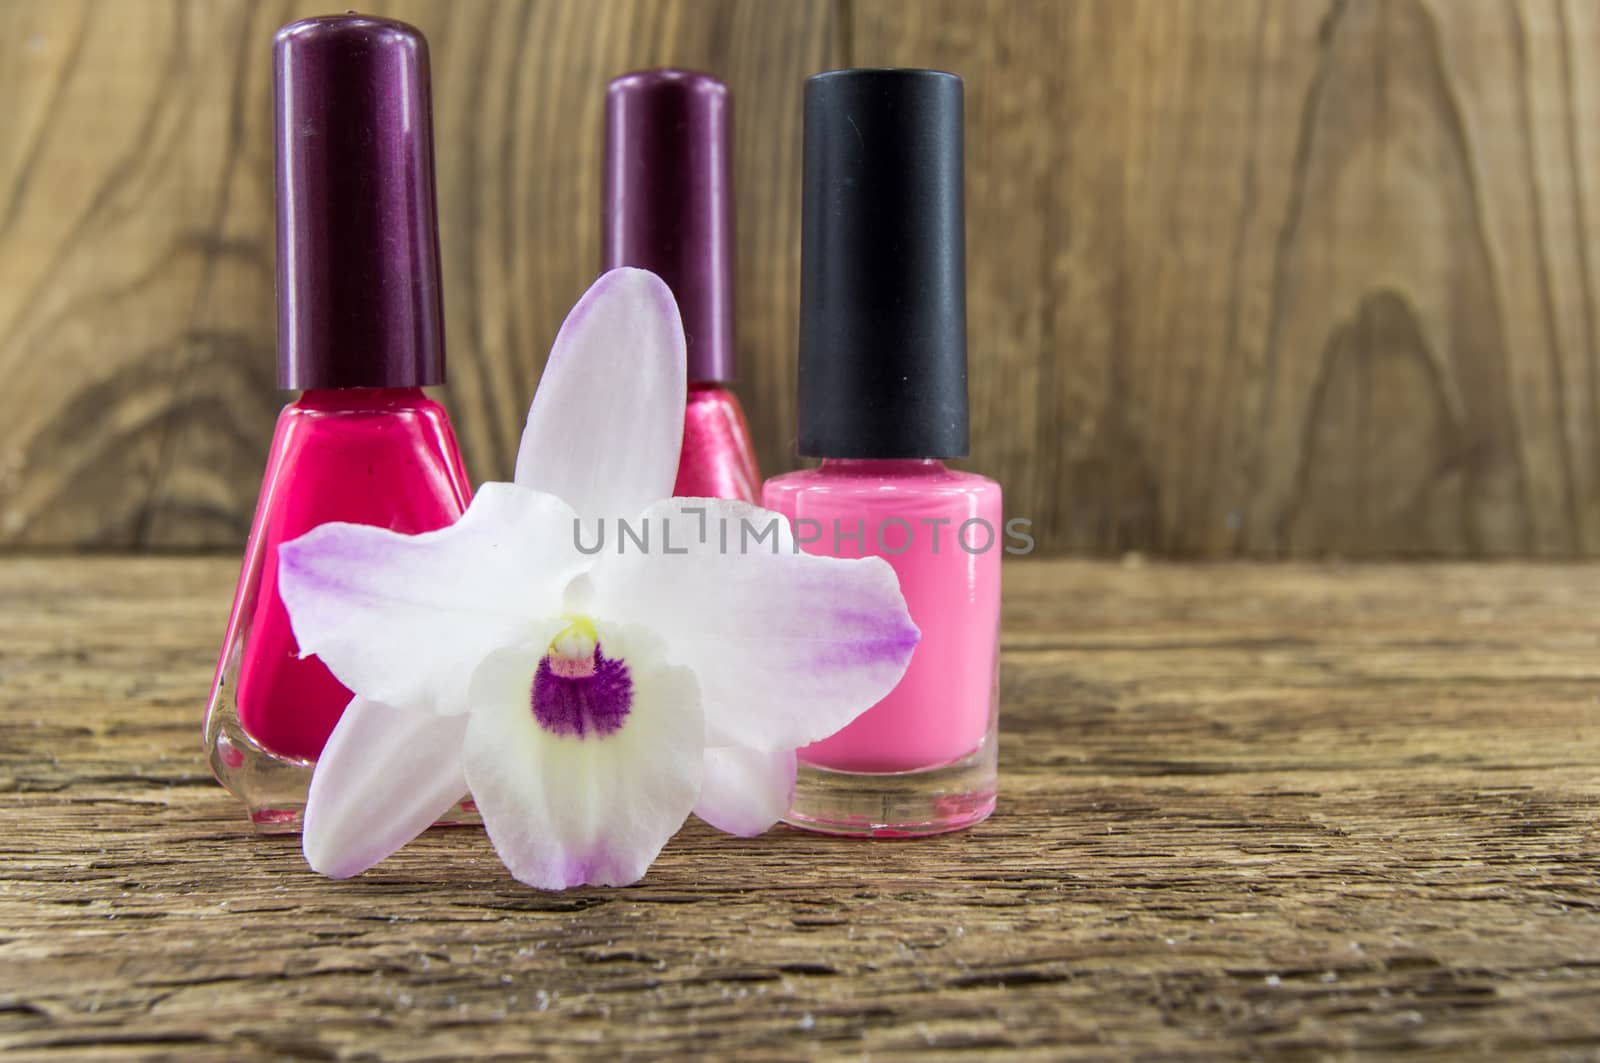 cosmetics and flowers on table wooden background. by serhii_lohvyniuk